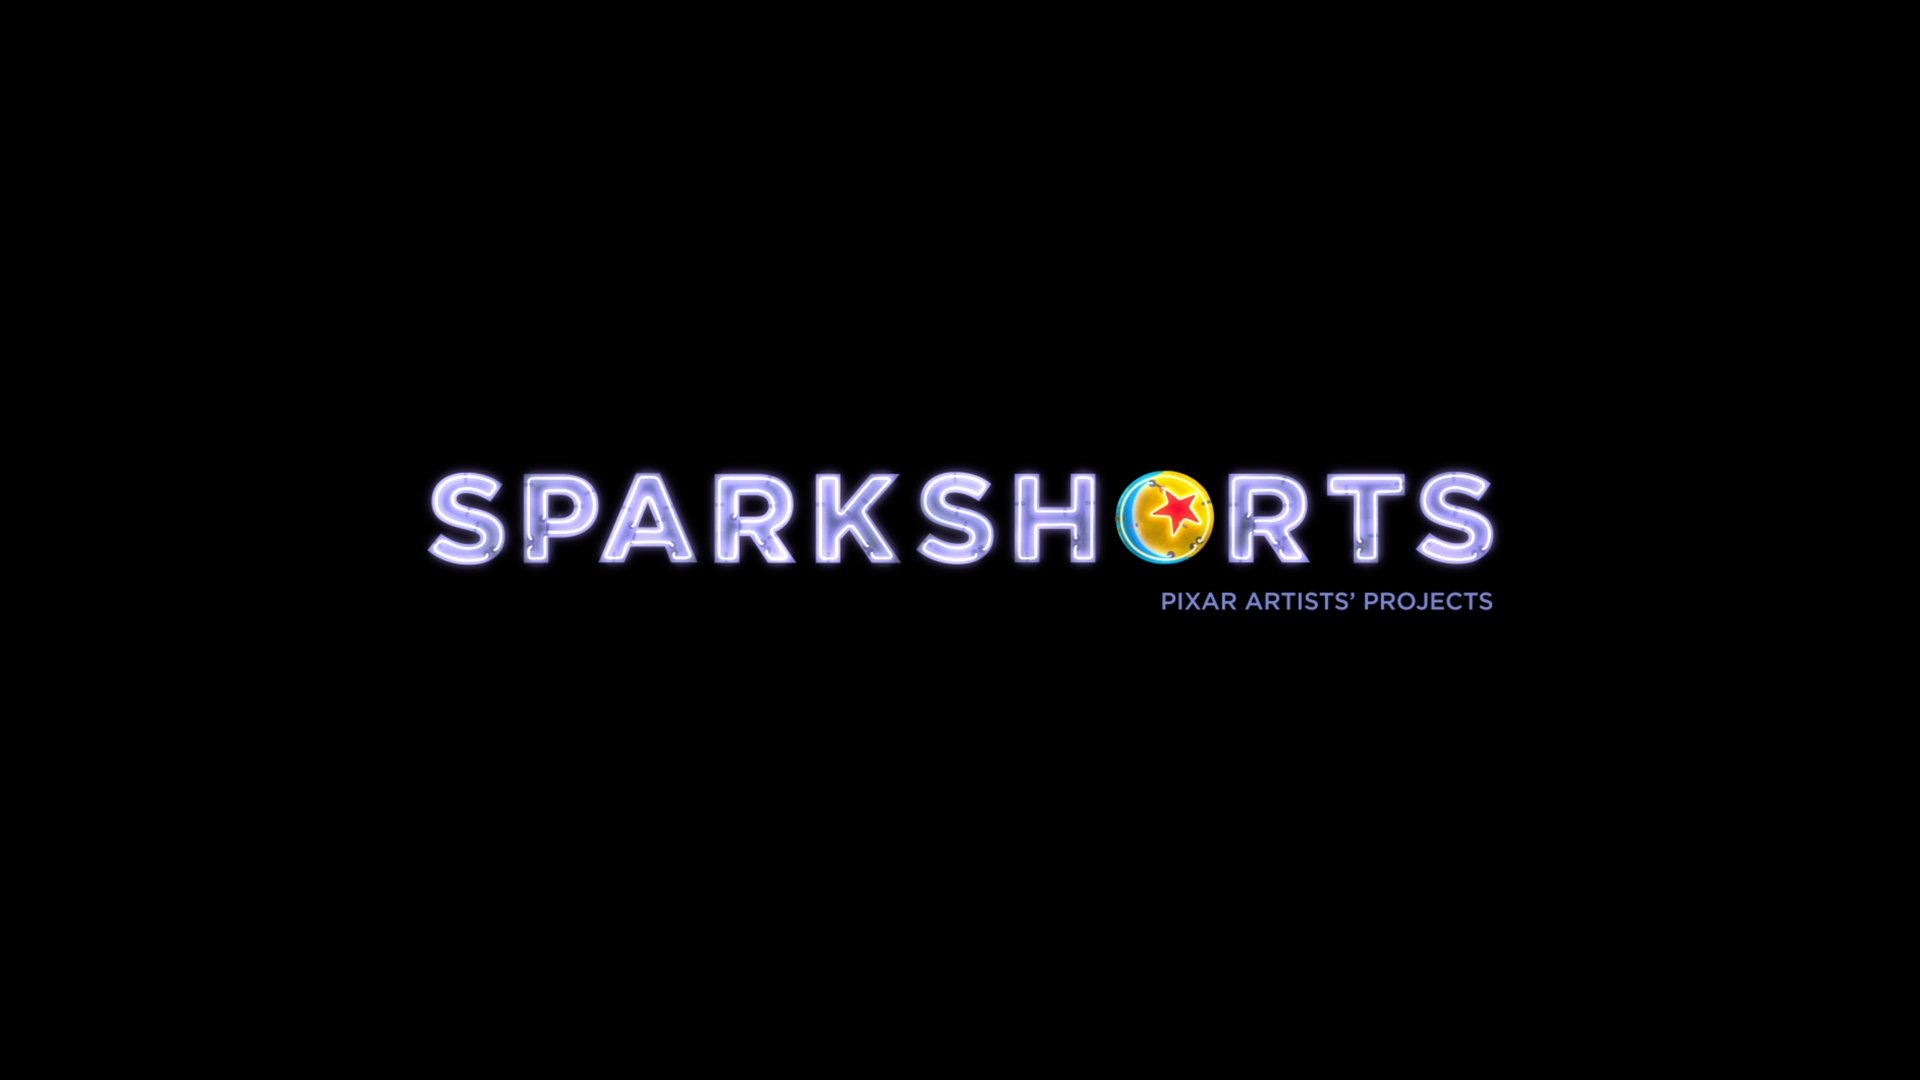 Wind Sparkshorts Poster Wallpapers